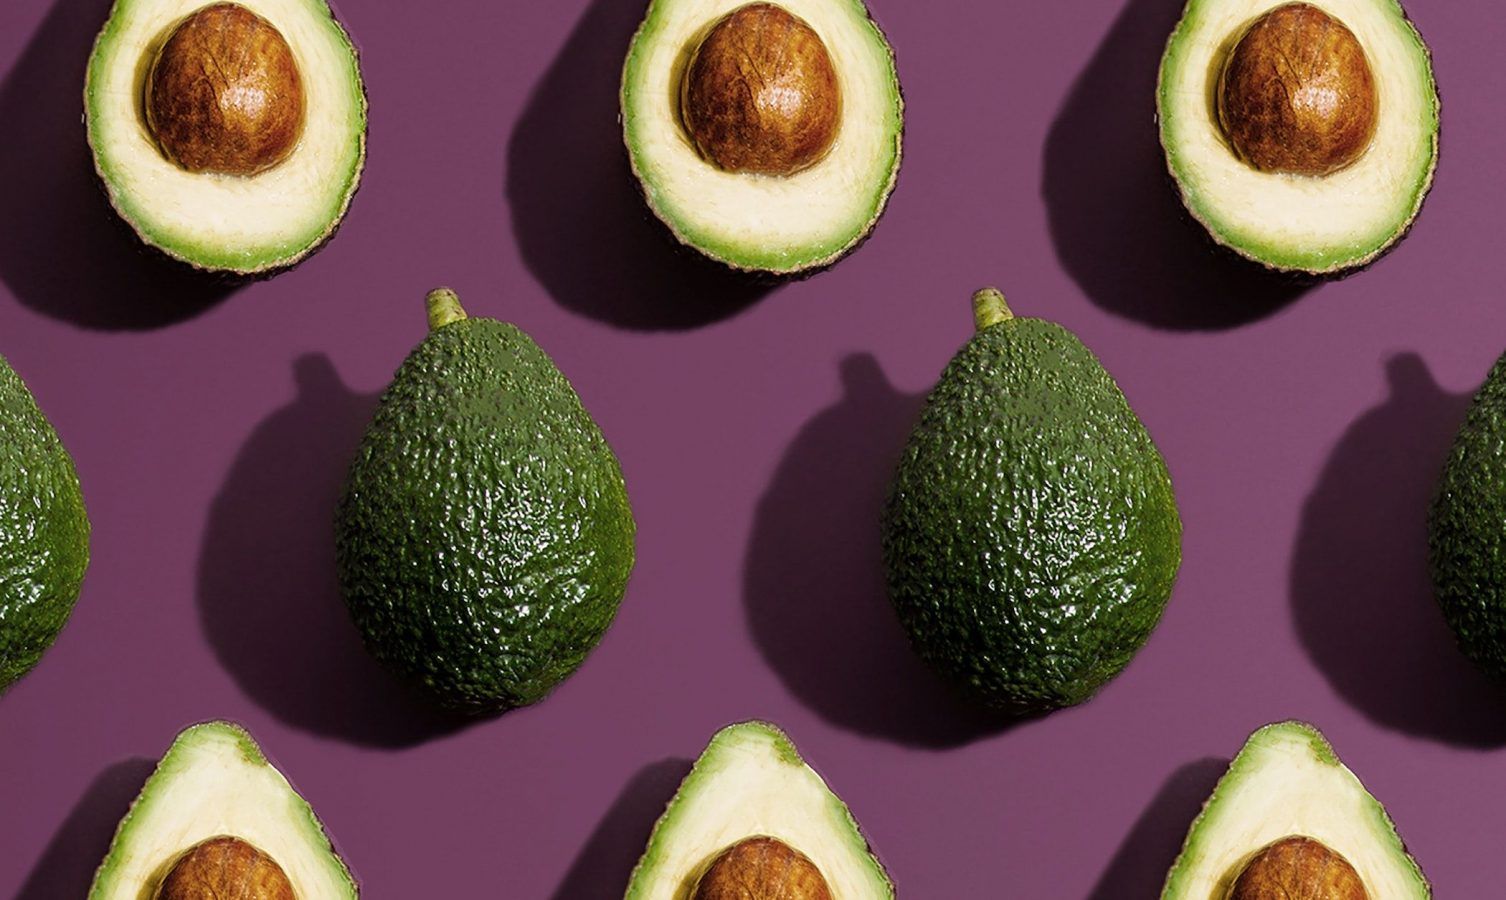 How to pick the perfect avocado and ripen it quickly